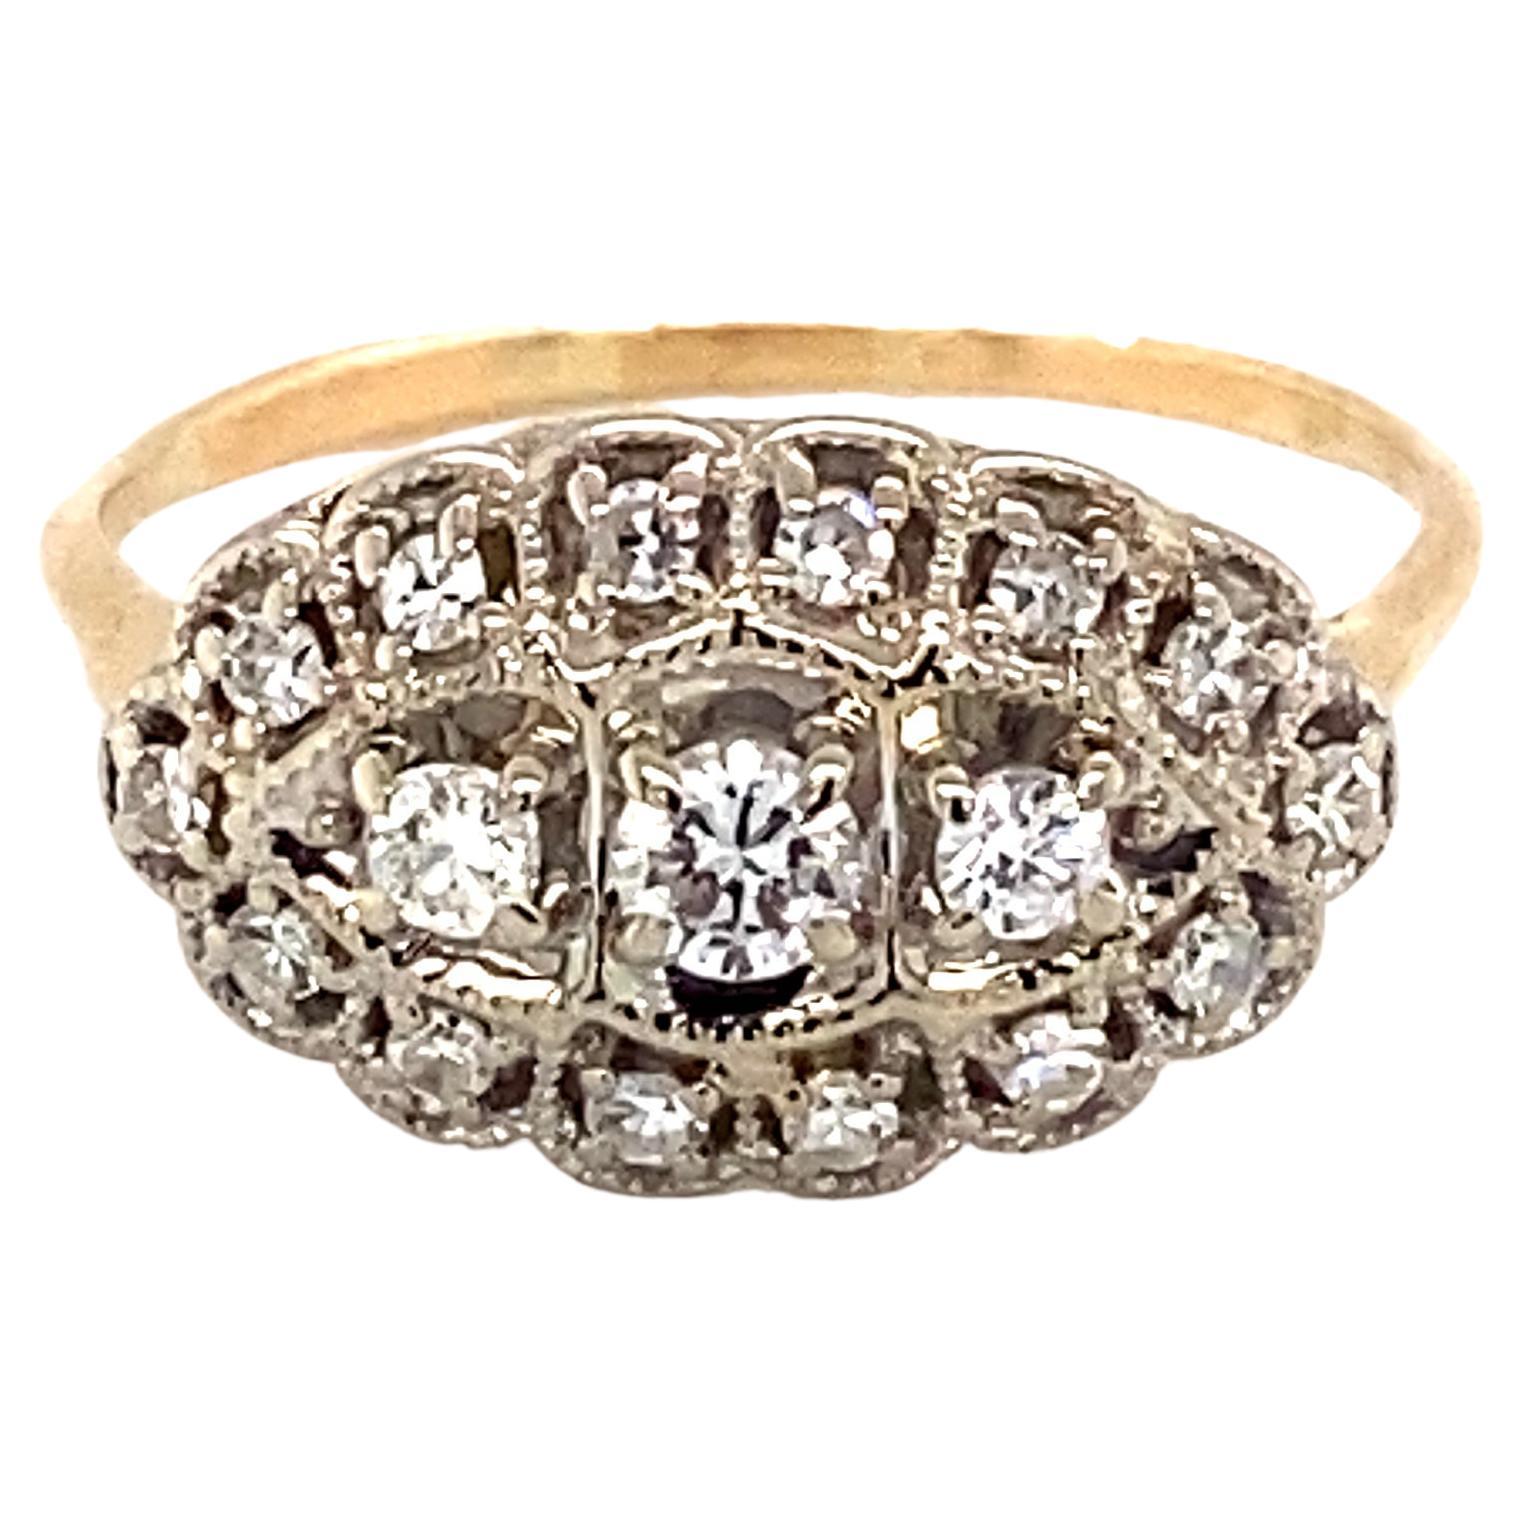 1930s Art Deco 0.25 Carat Diamond Ring in 14 Karat White and Yellow Gold For Sale